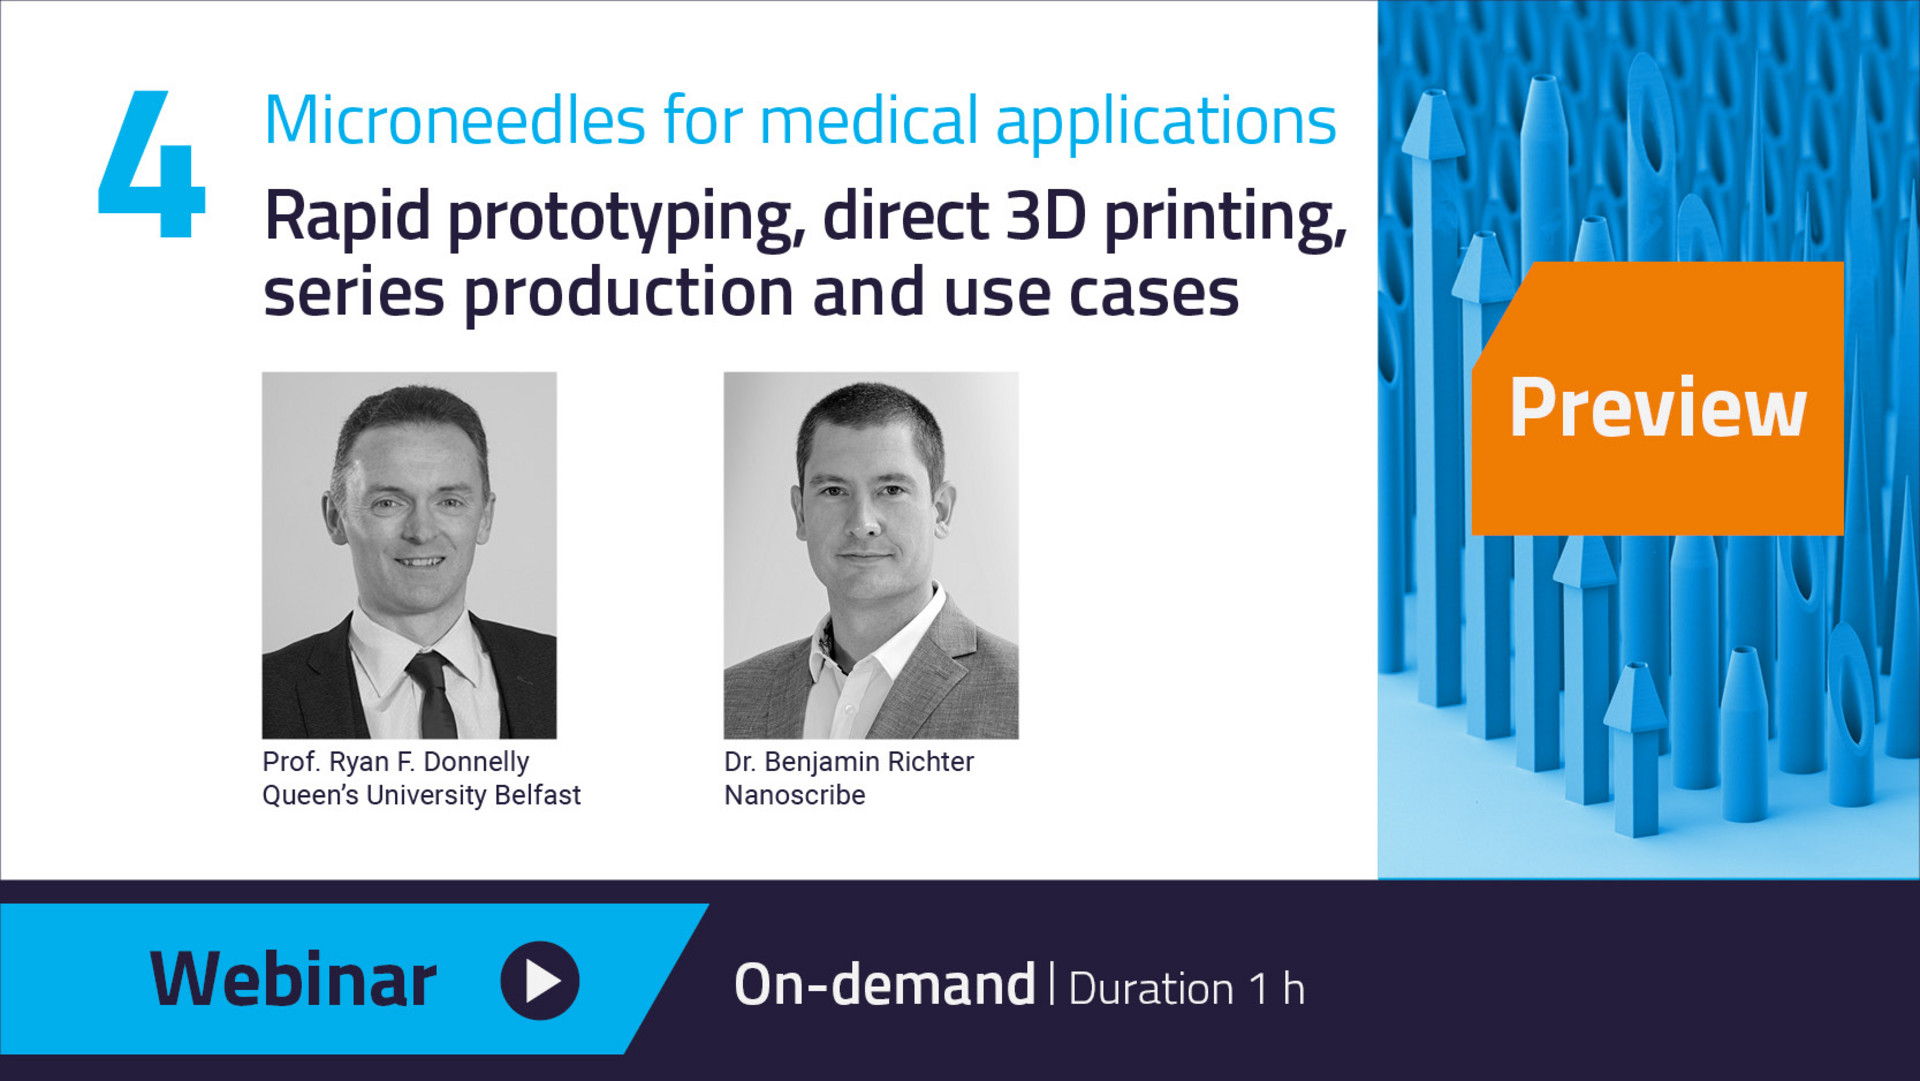 Our Webinar on Microneedles for medical applications is now available on-demand - watch the webinar here